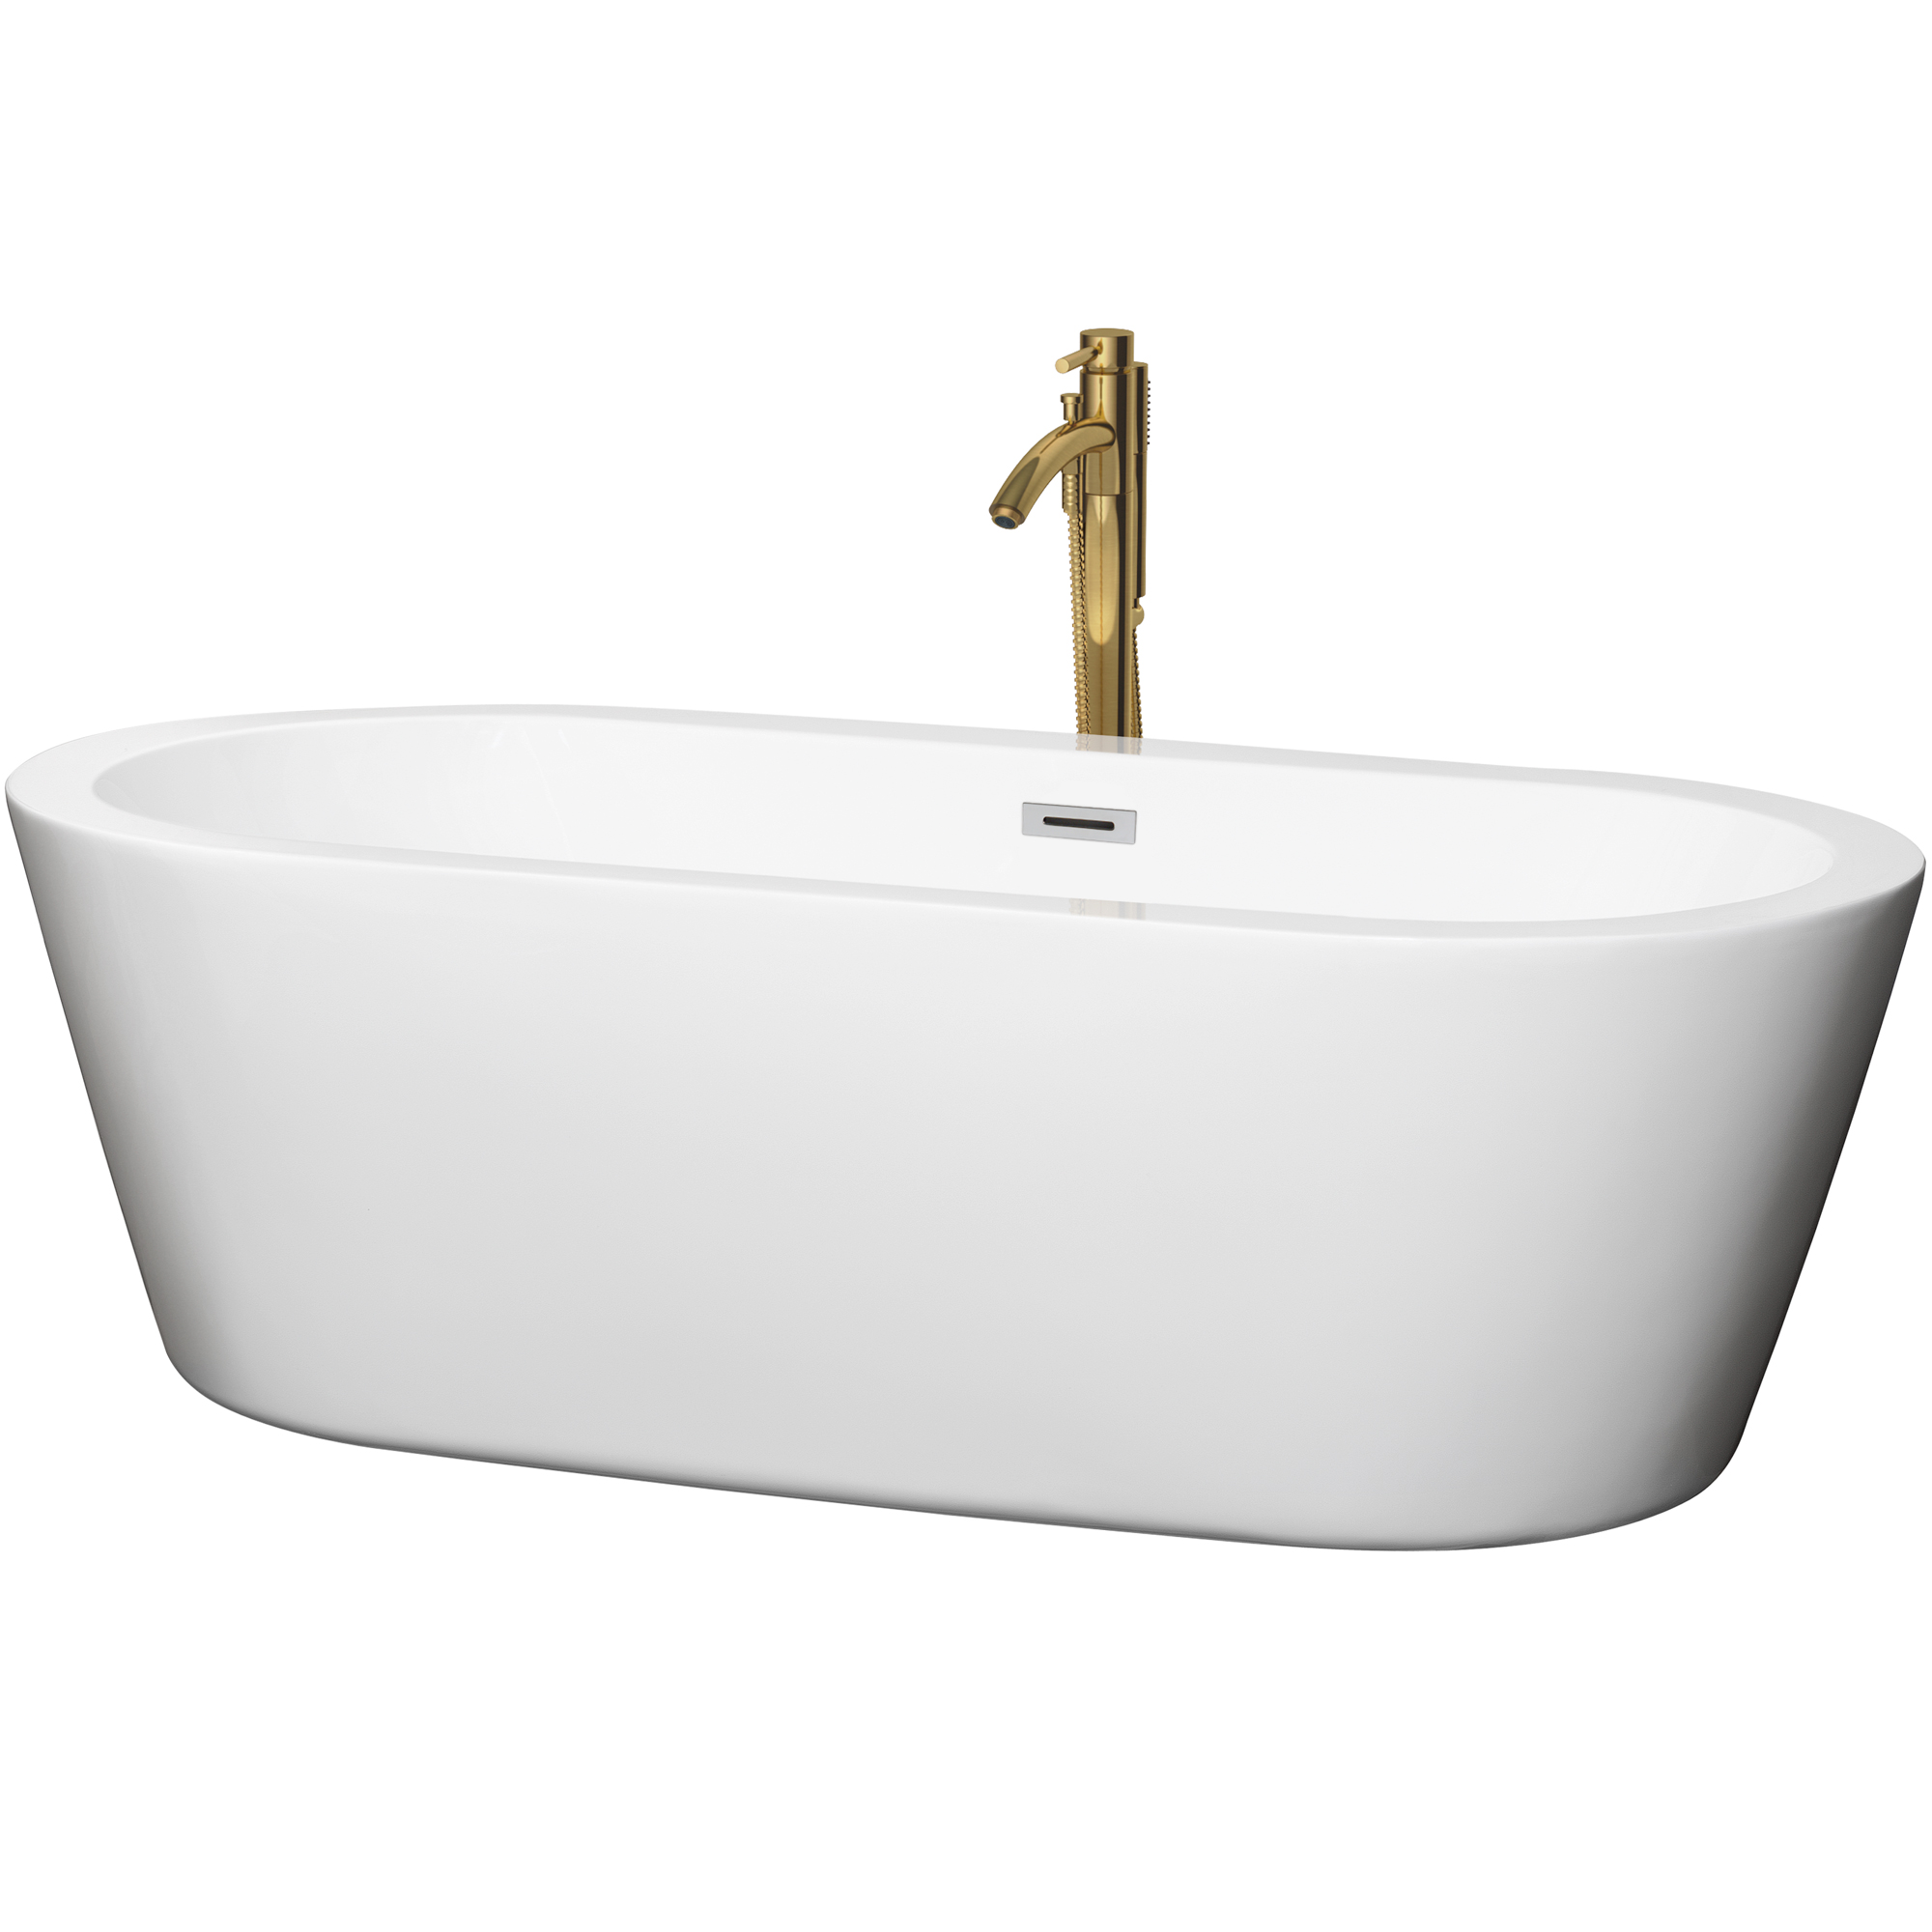 71" Freestanding Bathtub in White with Floor Mounted Faucet in Brushed Gold and Polished Chrome Trim